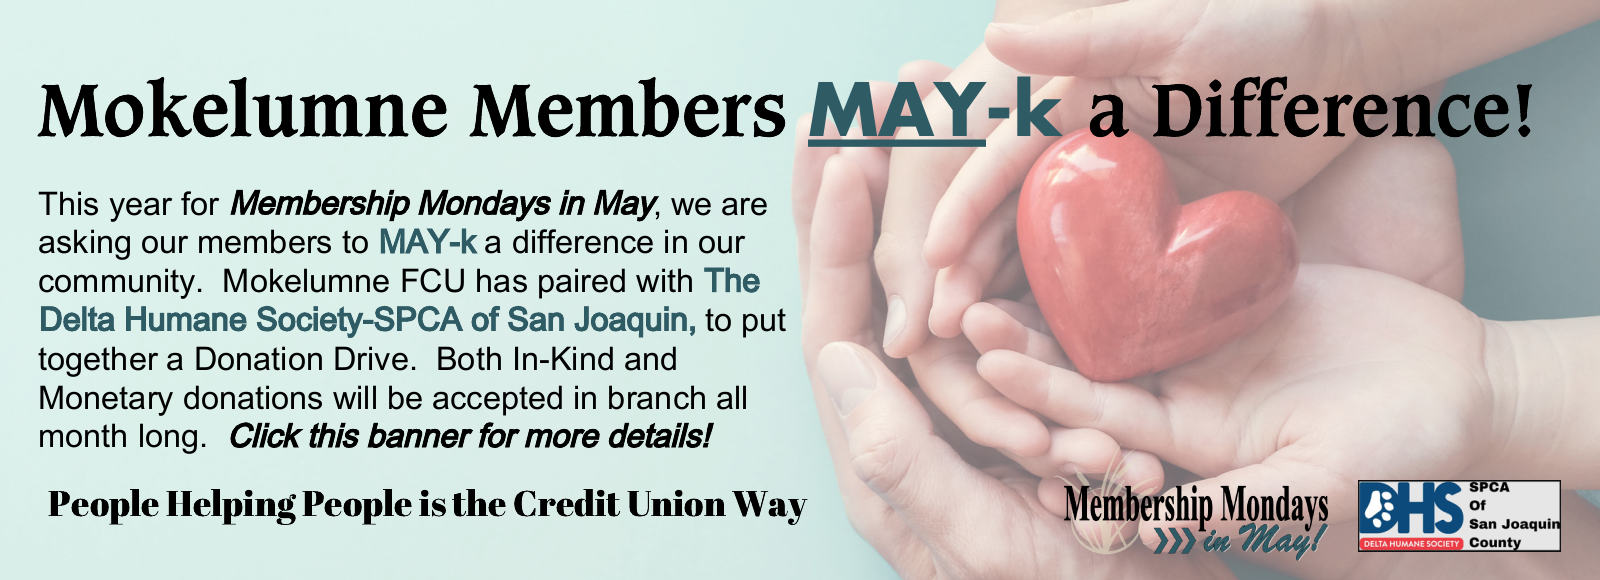 Members MAY-k a difference